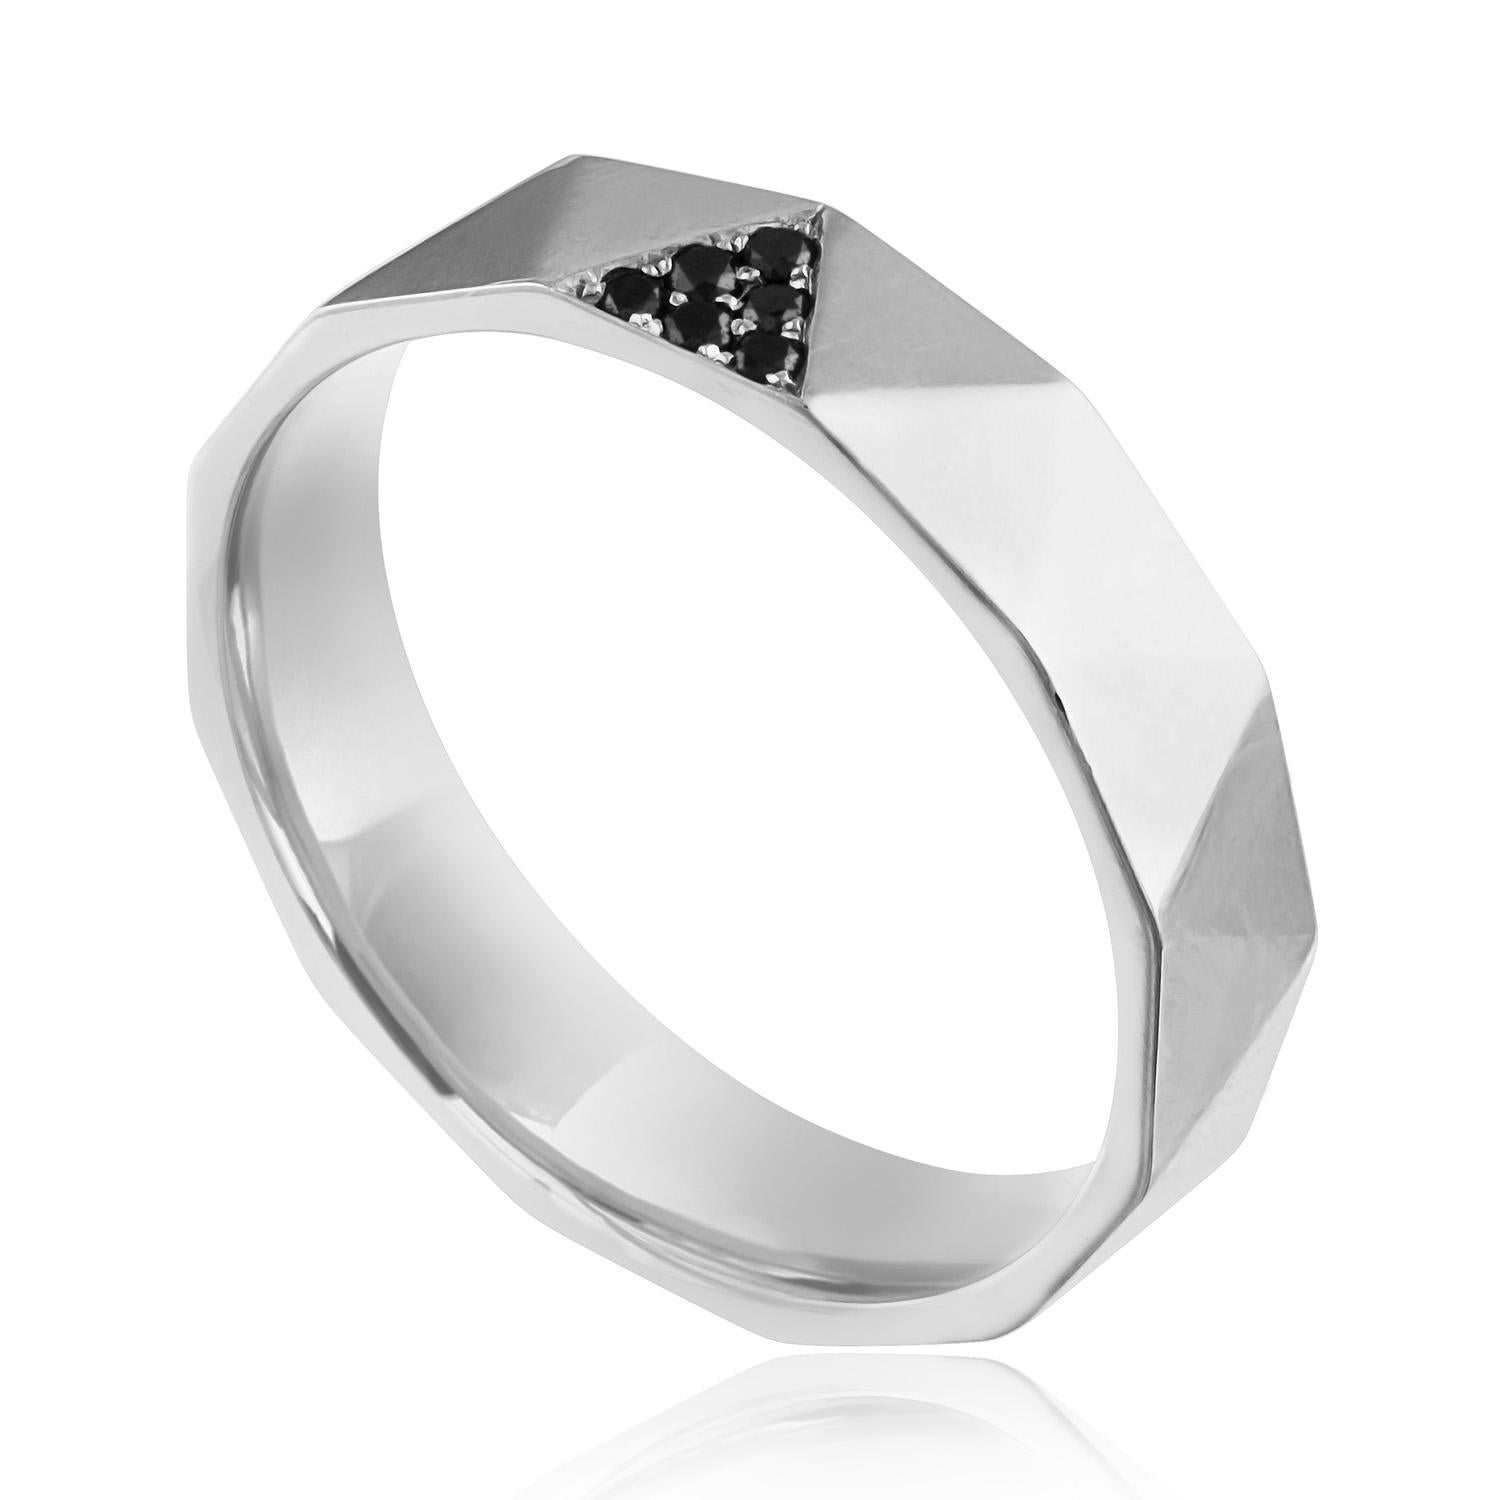 Men's Diamond Wedding Band Ring
The Ring is 14K White Gold
The Round Cut Black Diamonds are 0.10 Carats
The ring is a size 10.5, NOT sizable
The ring weighs 3.4 grams